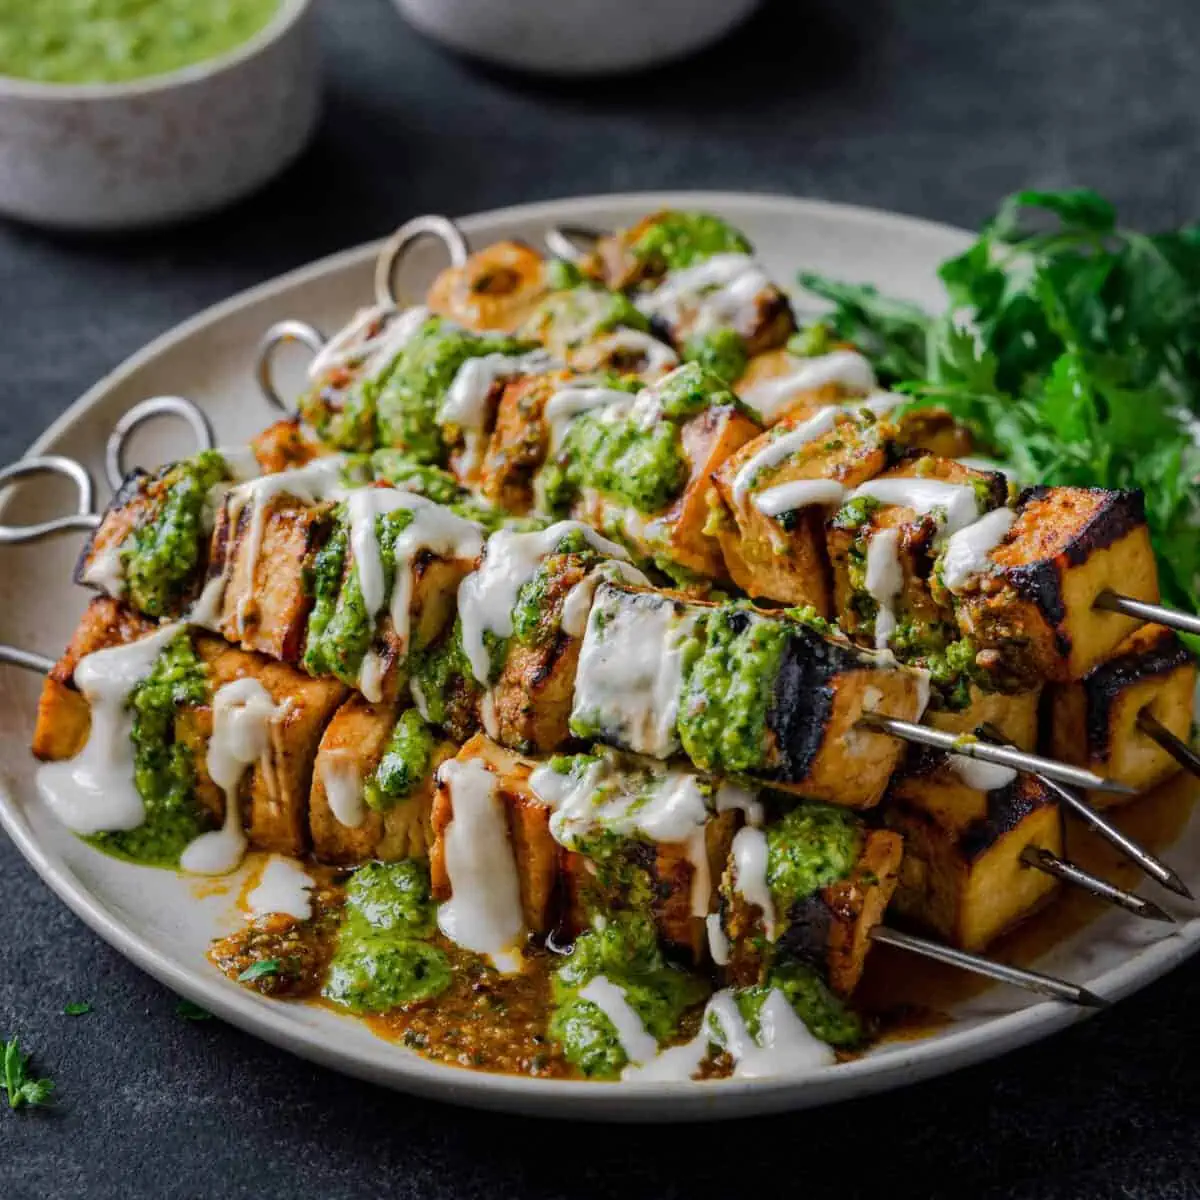 Grilled tofo skewers in a plate with sauce